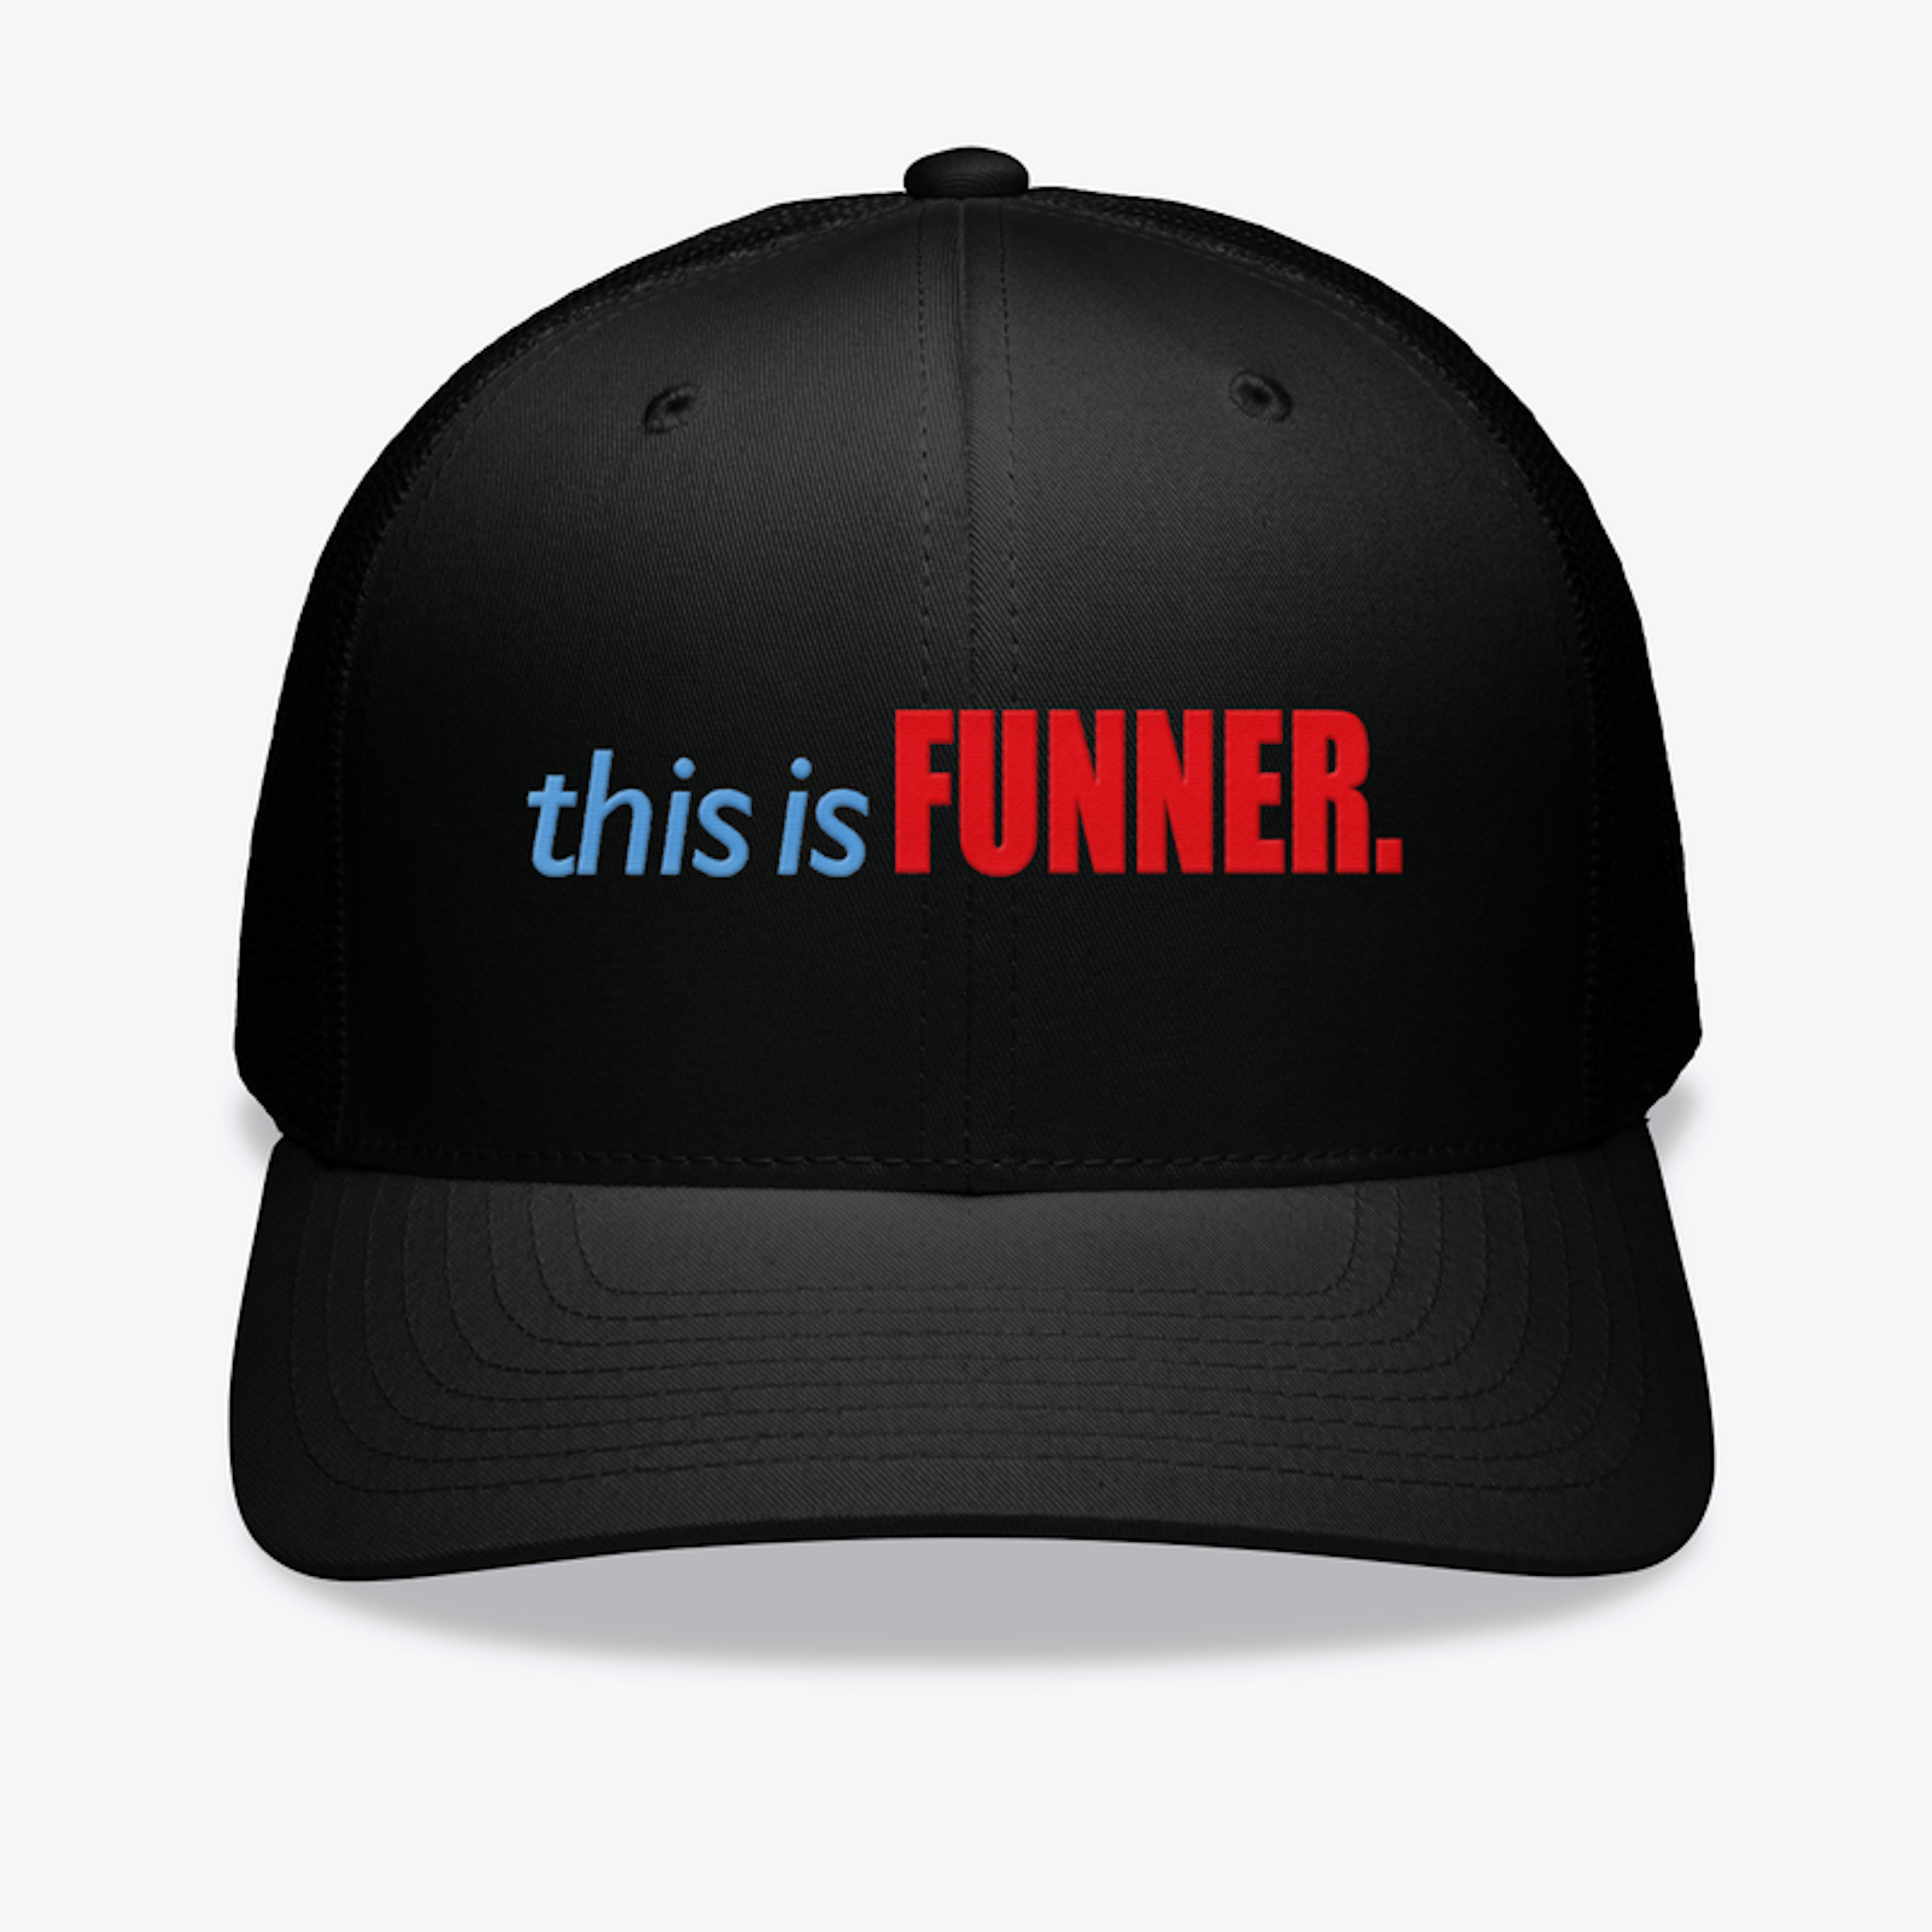 This is Funner Hats